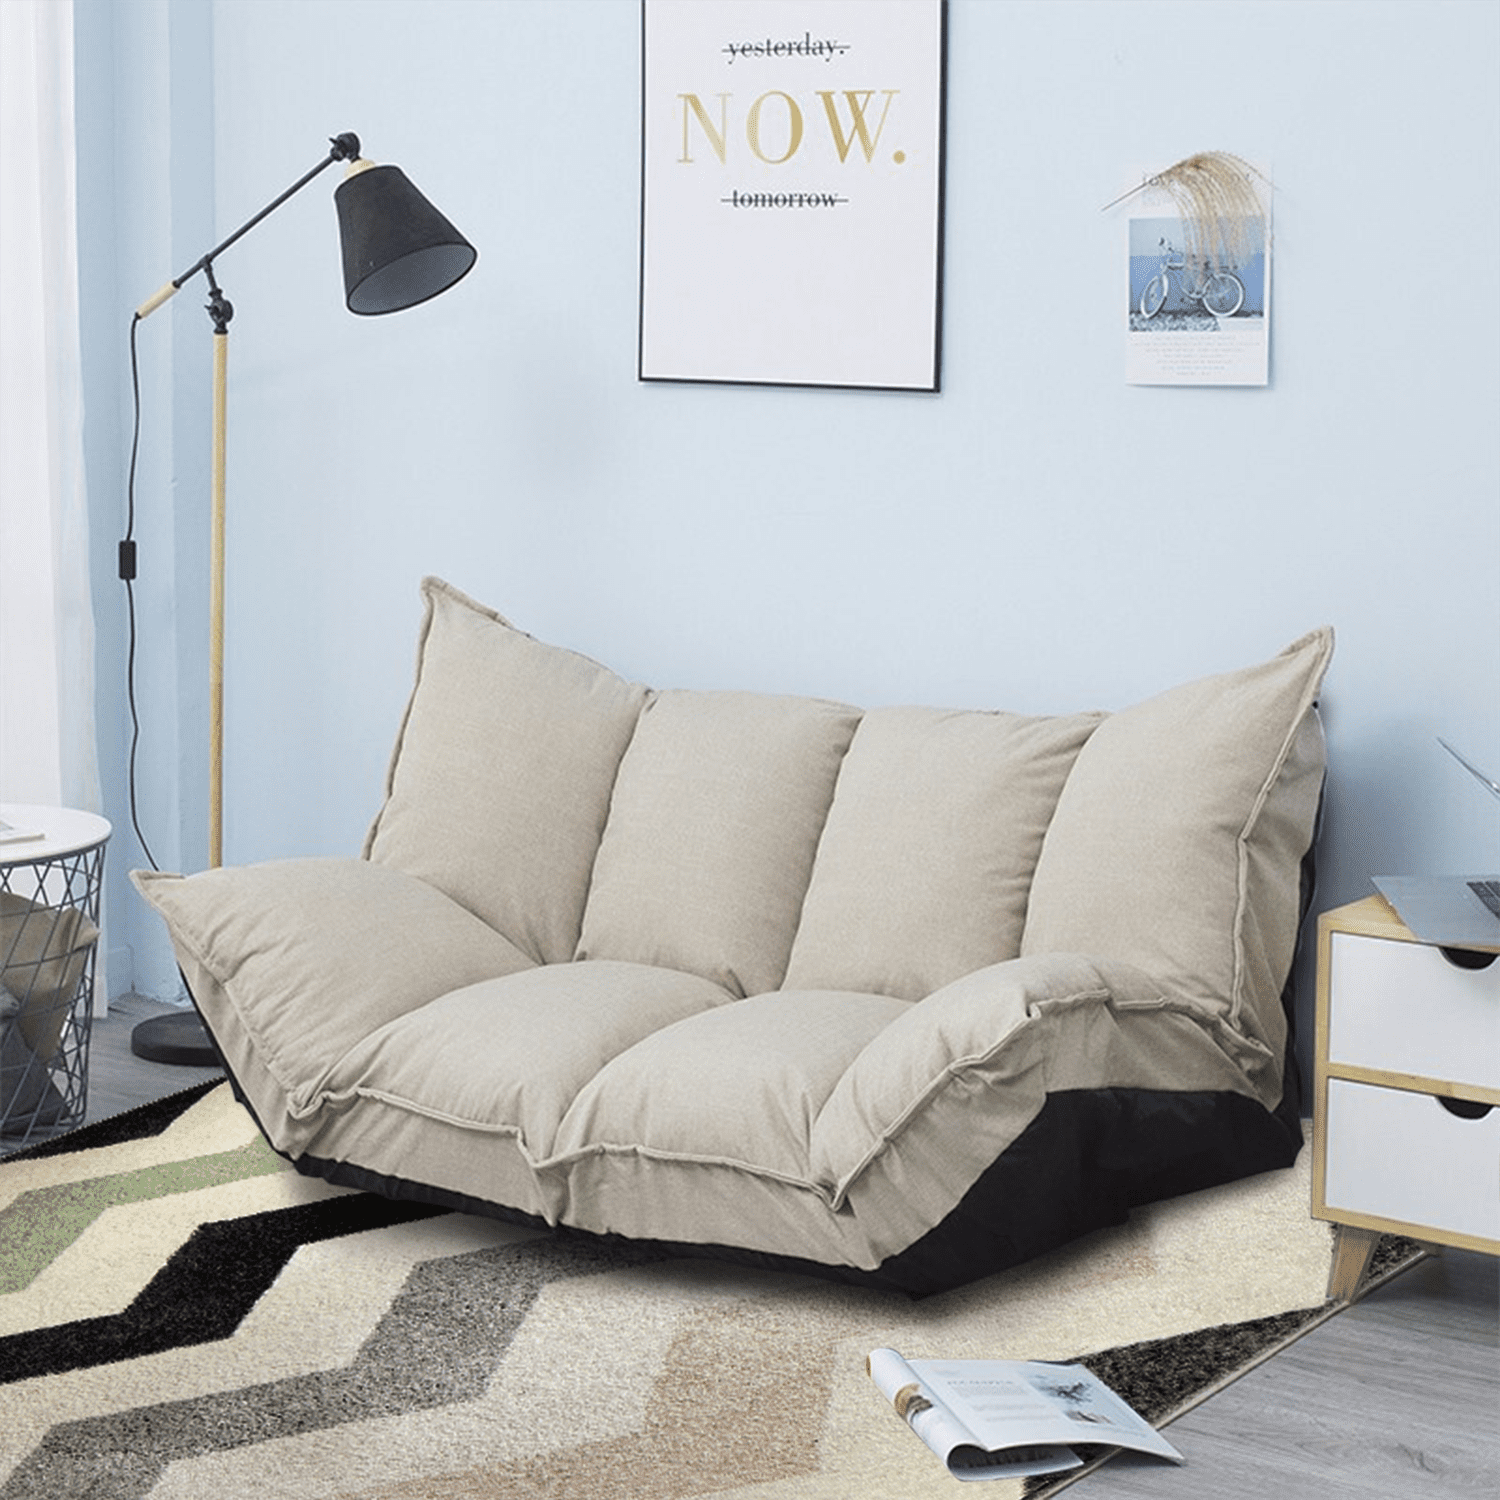 Beige Elibeauty Lazy Leisure Sofa-indoor Fabric Leisure Sofa Lazy Sofa Bean Bag Bedroom Leisure Seat Cover Ergonomic Design Removable And Washable